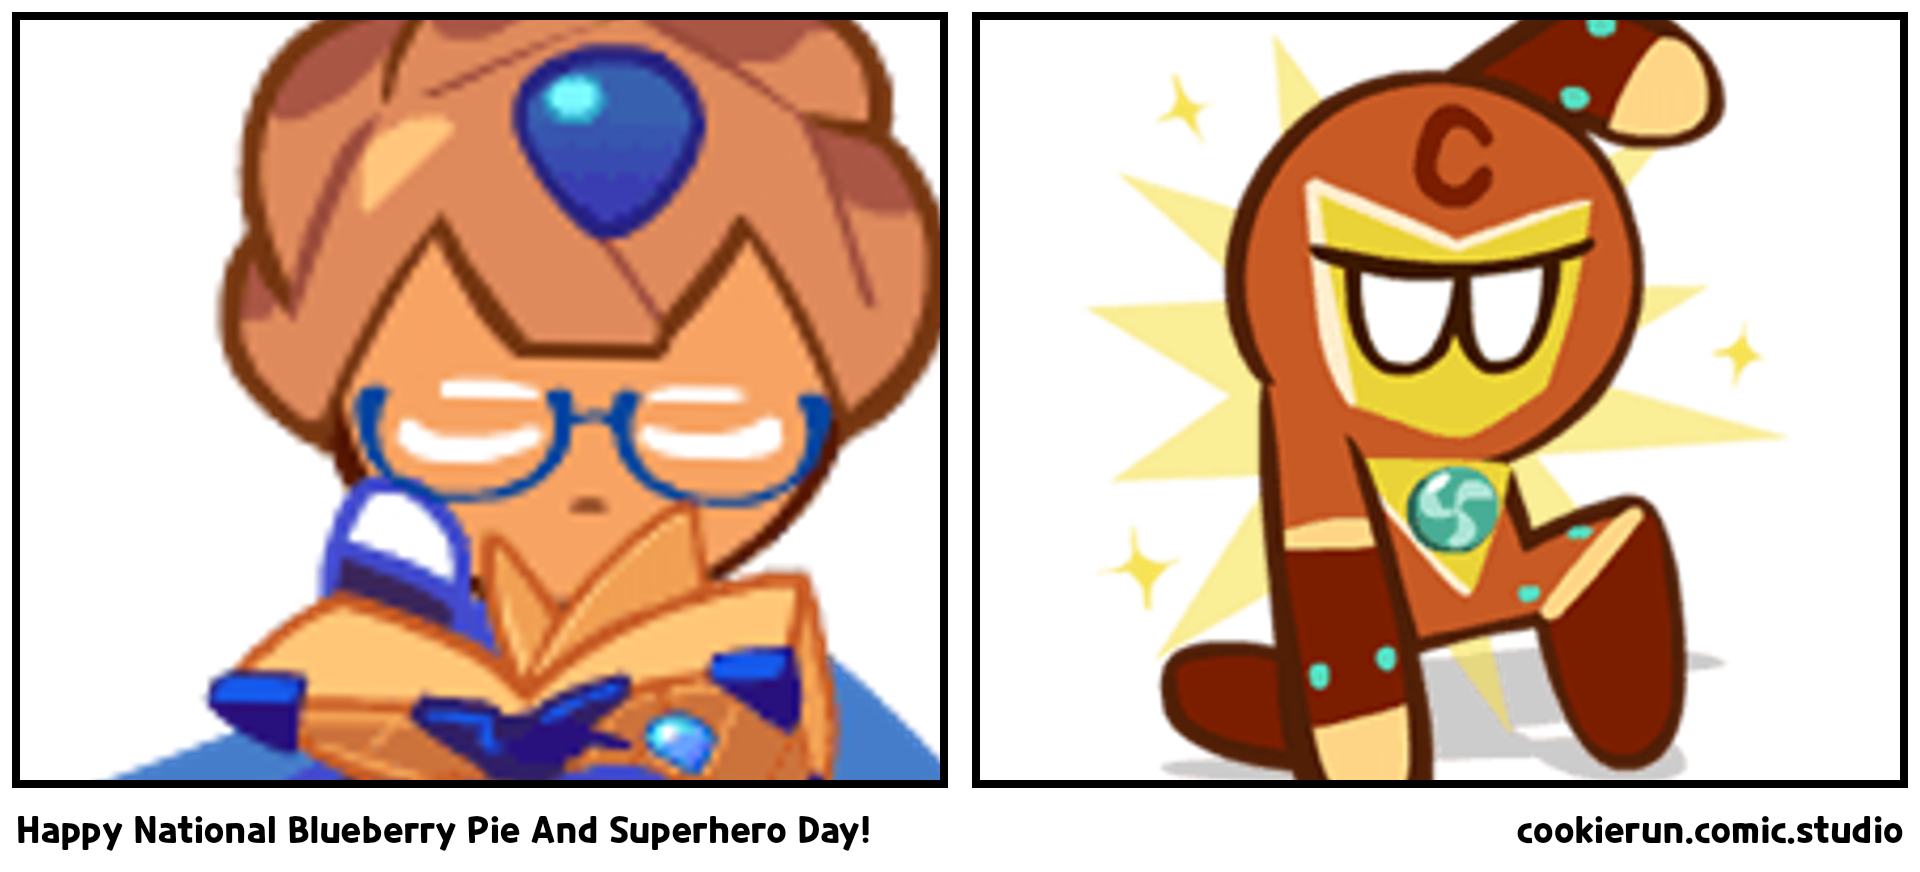 Happy National Blueberry Pie And Superhero Day!